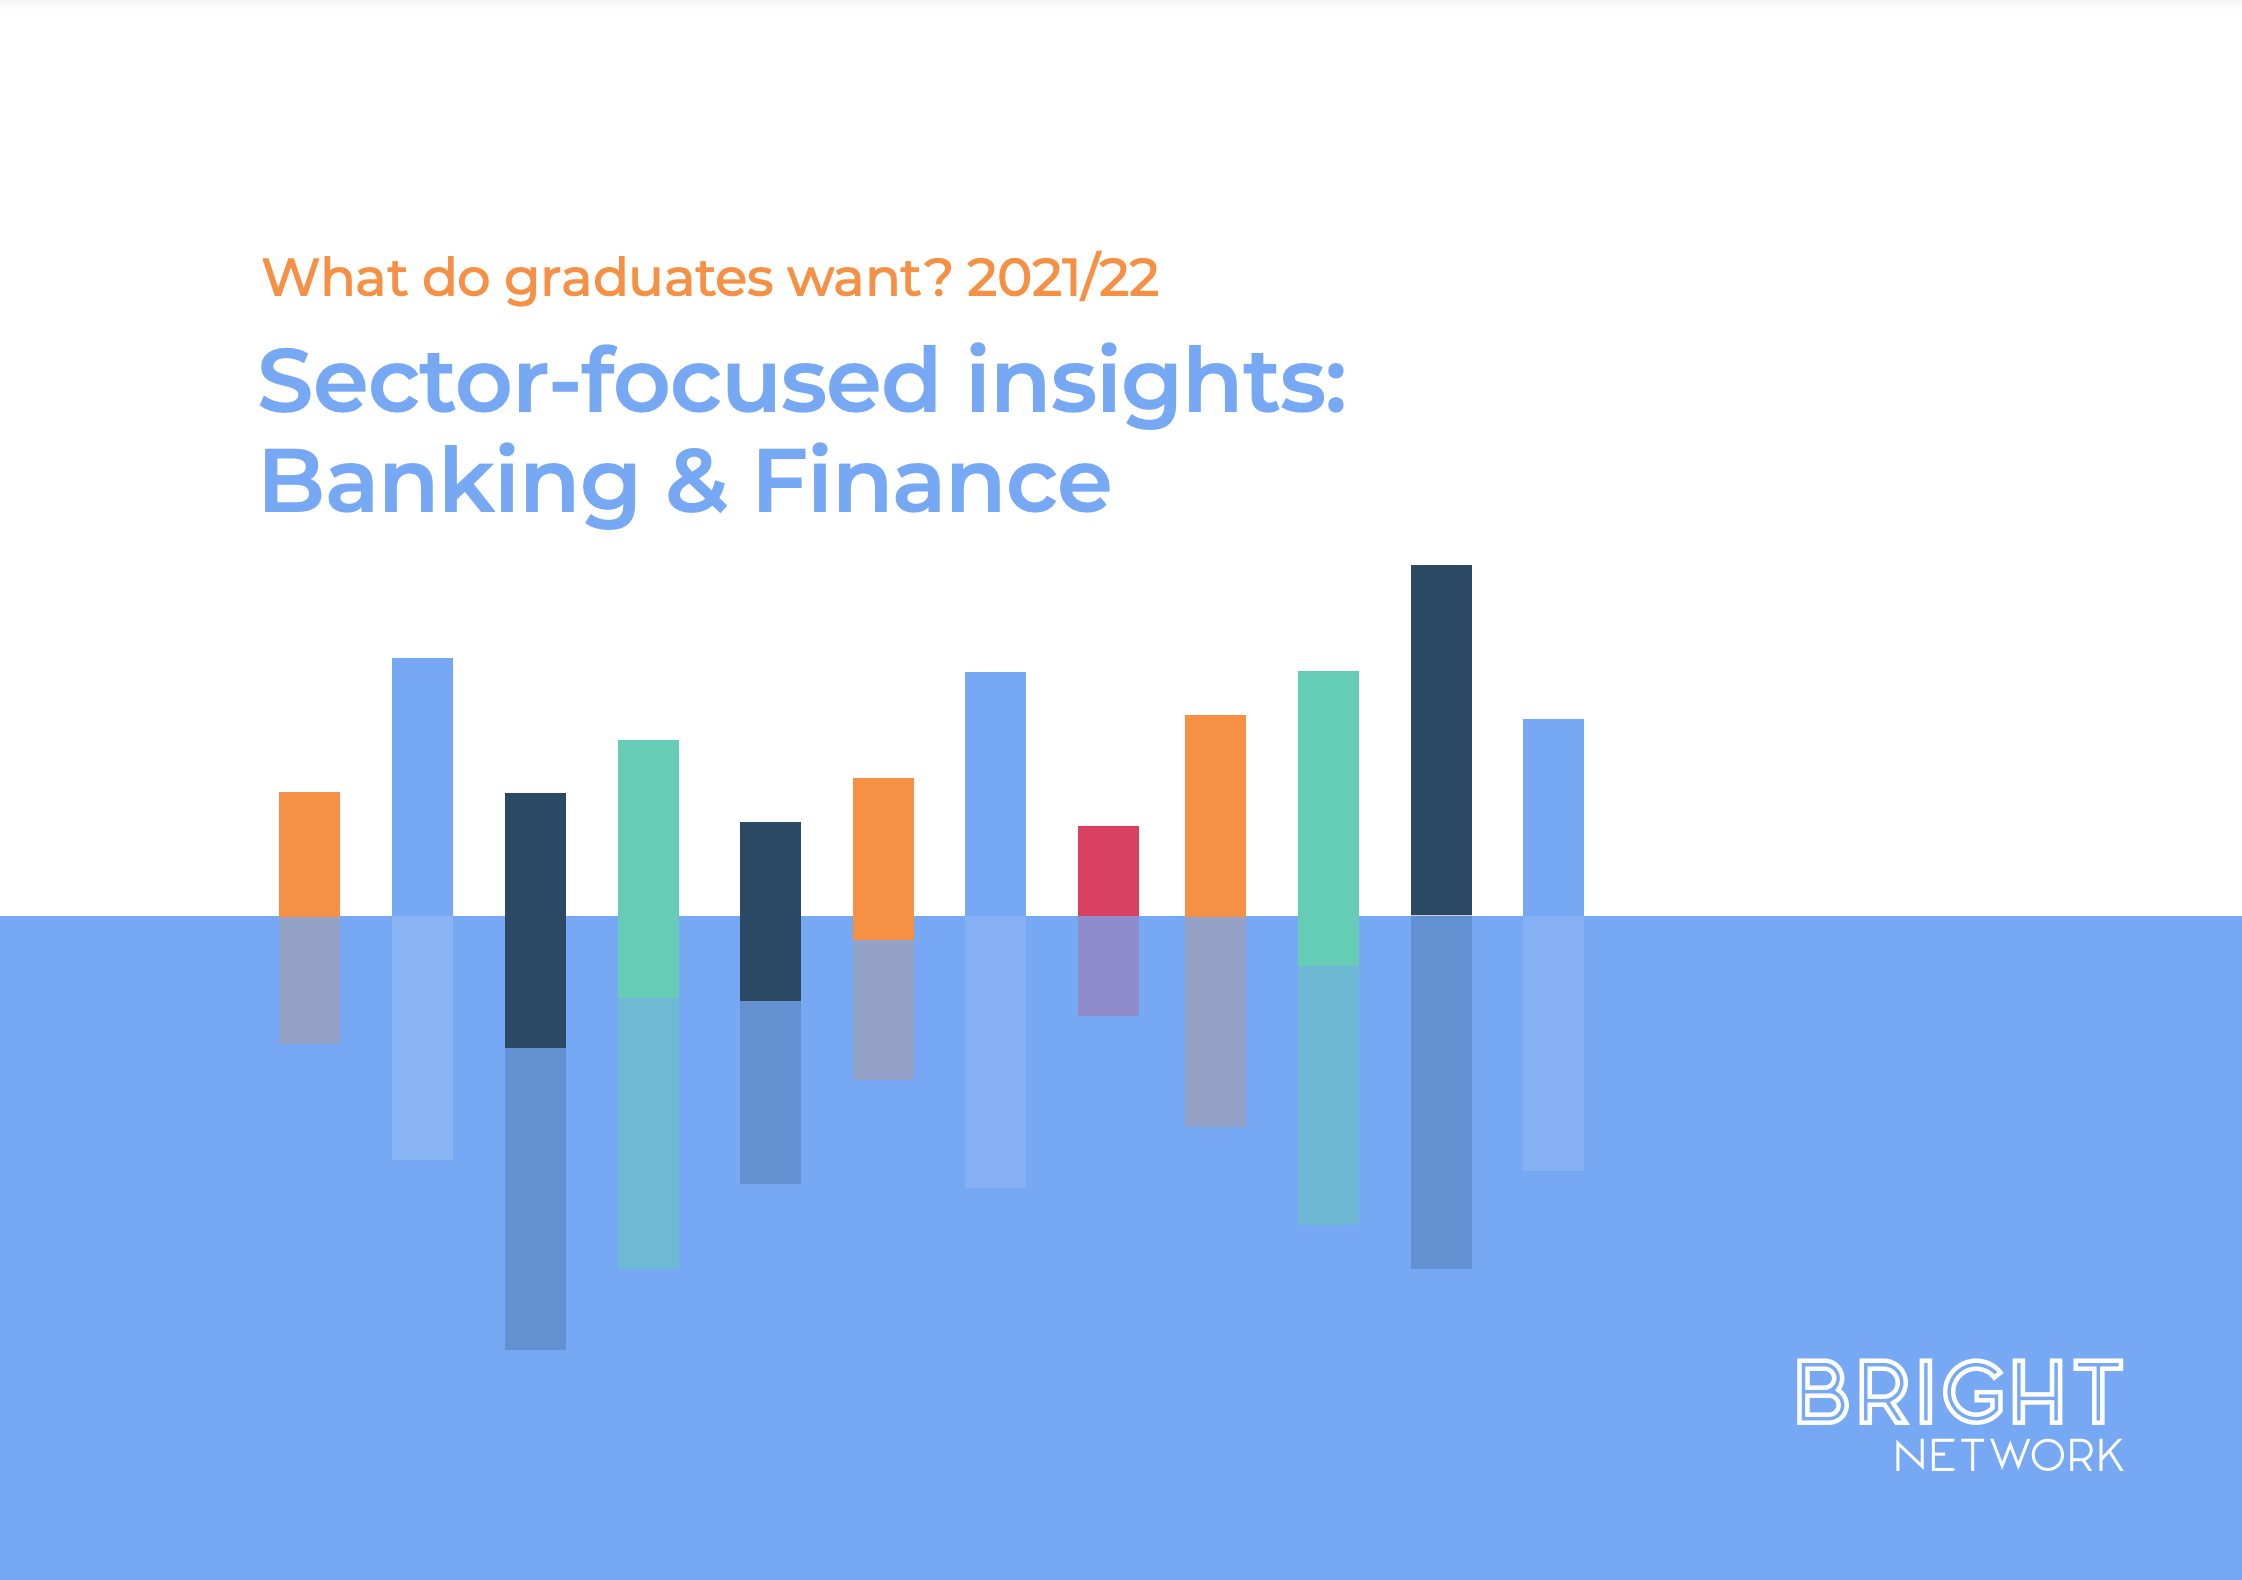 Sector-focused insights: Banking & Finance